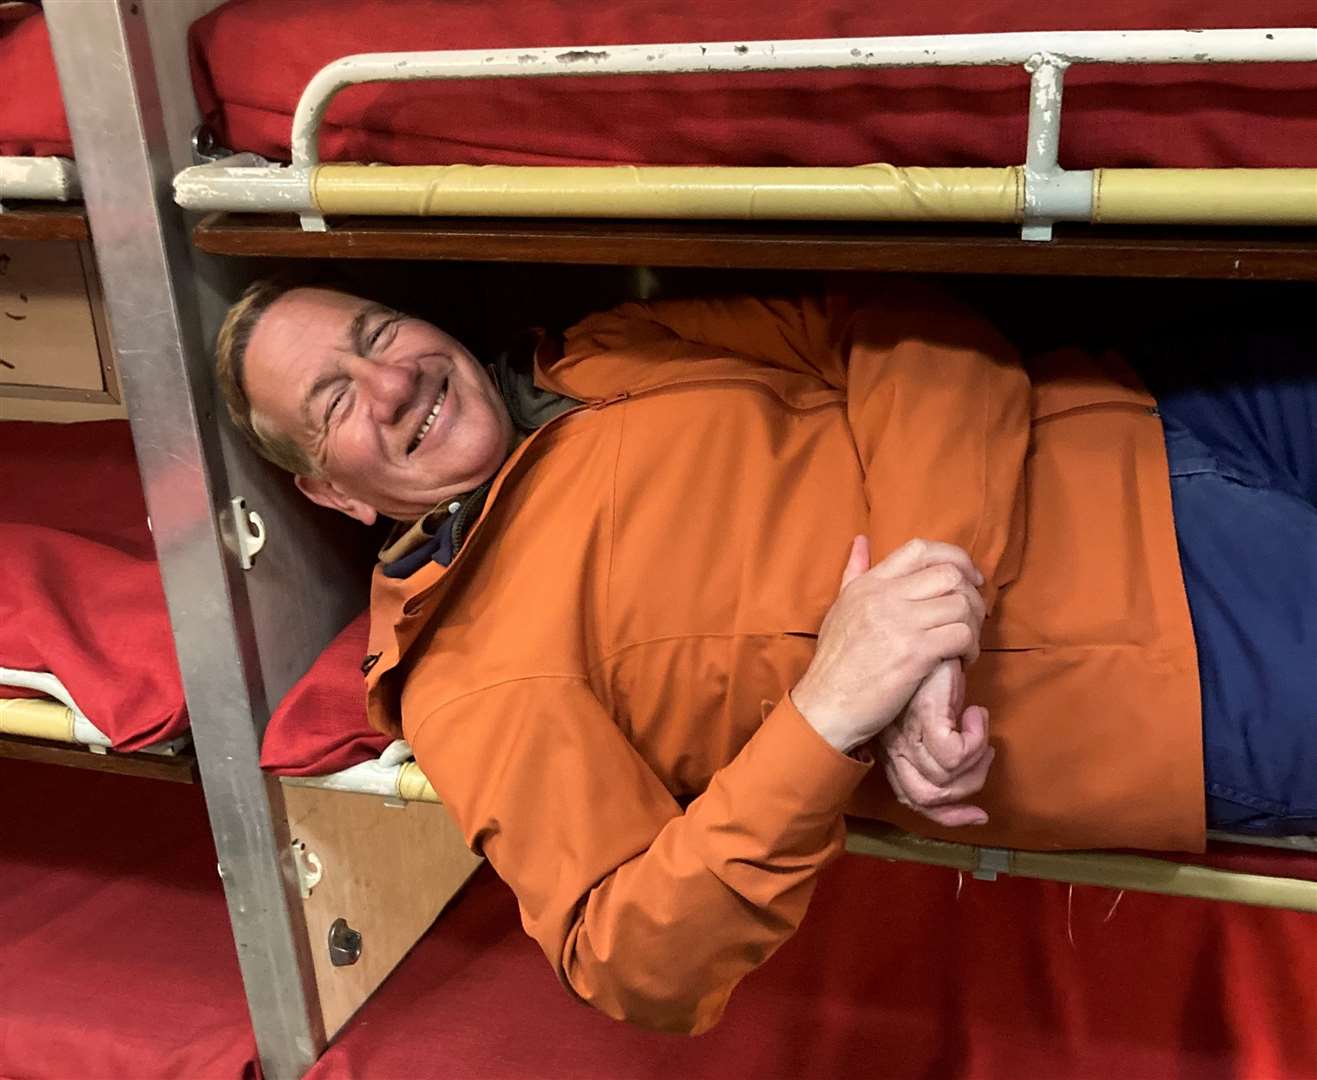 The presenter tried to squeeze into a HMS Ocelot submarine bunkbed at The Historic Dockyard Chatham. Picture: BBC/Naked West/Fremantle